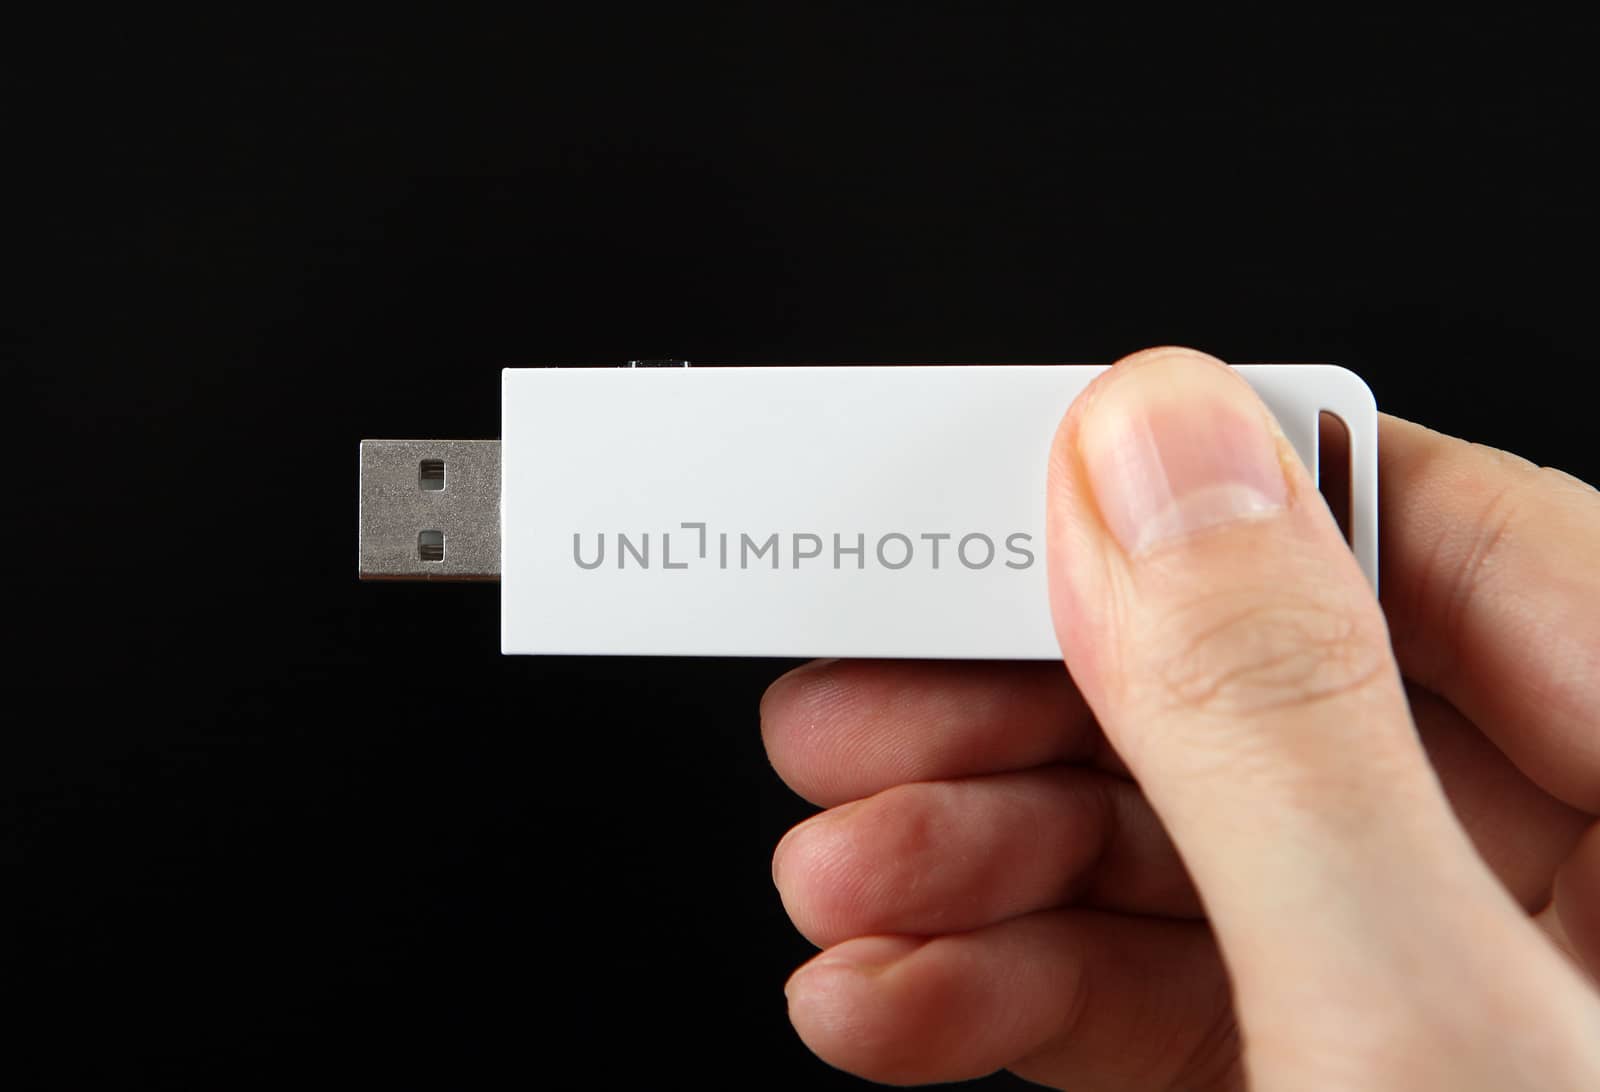 USB Drive in the Hand by sabphoto